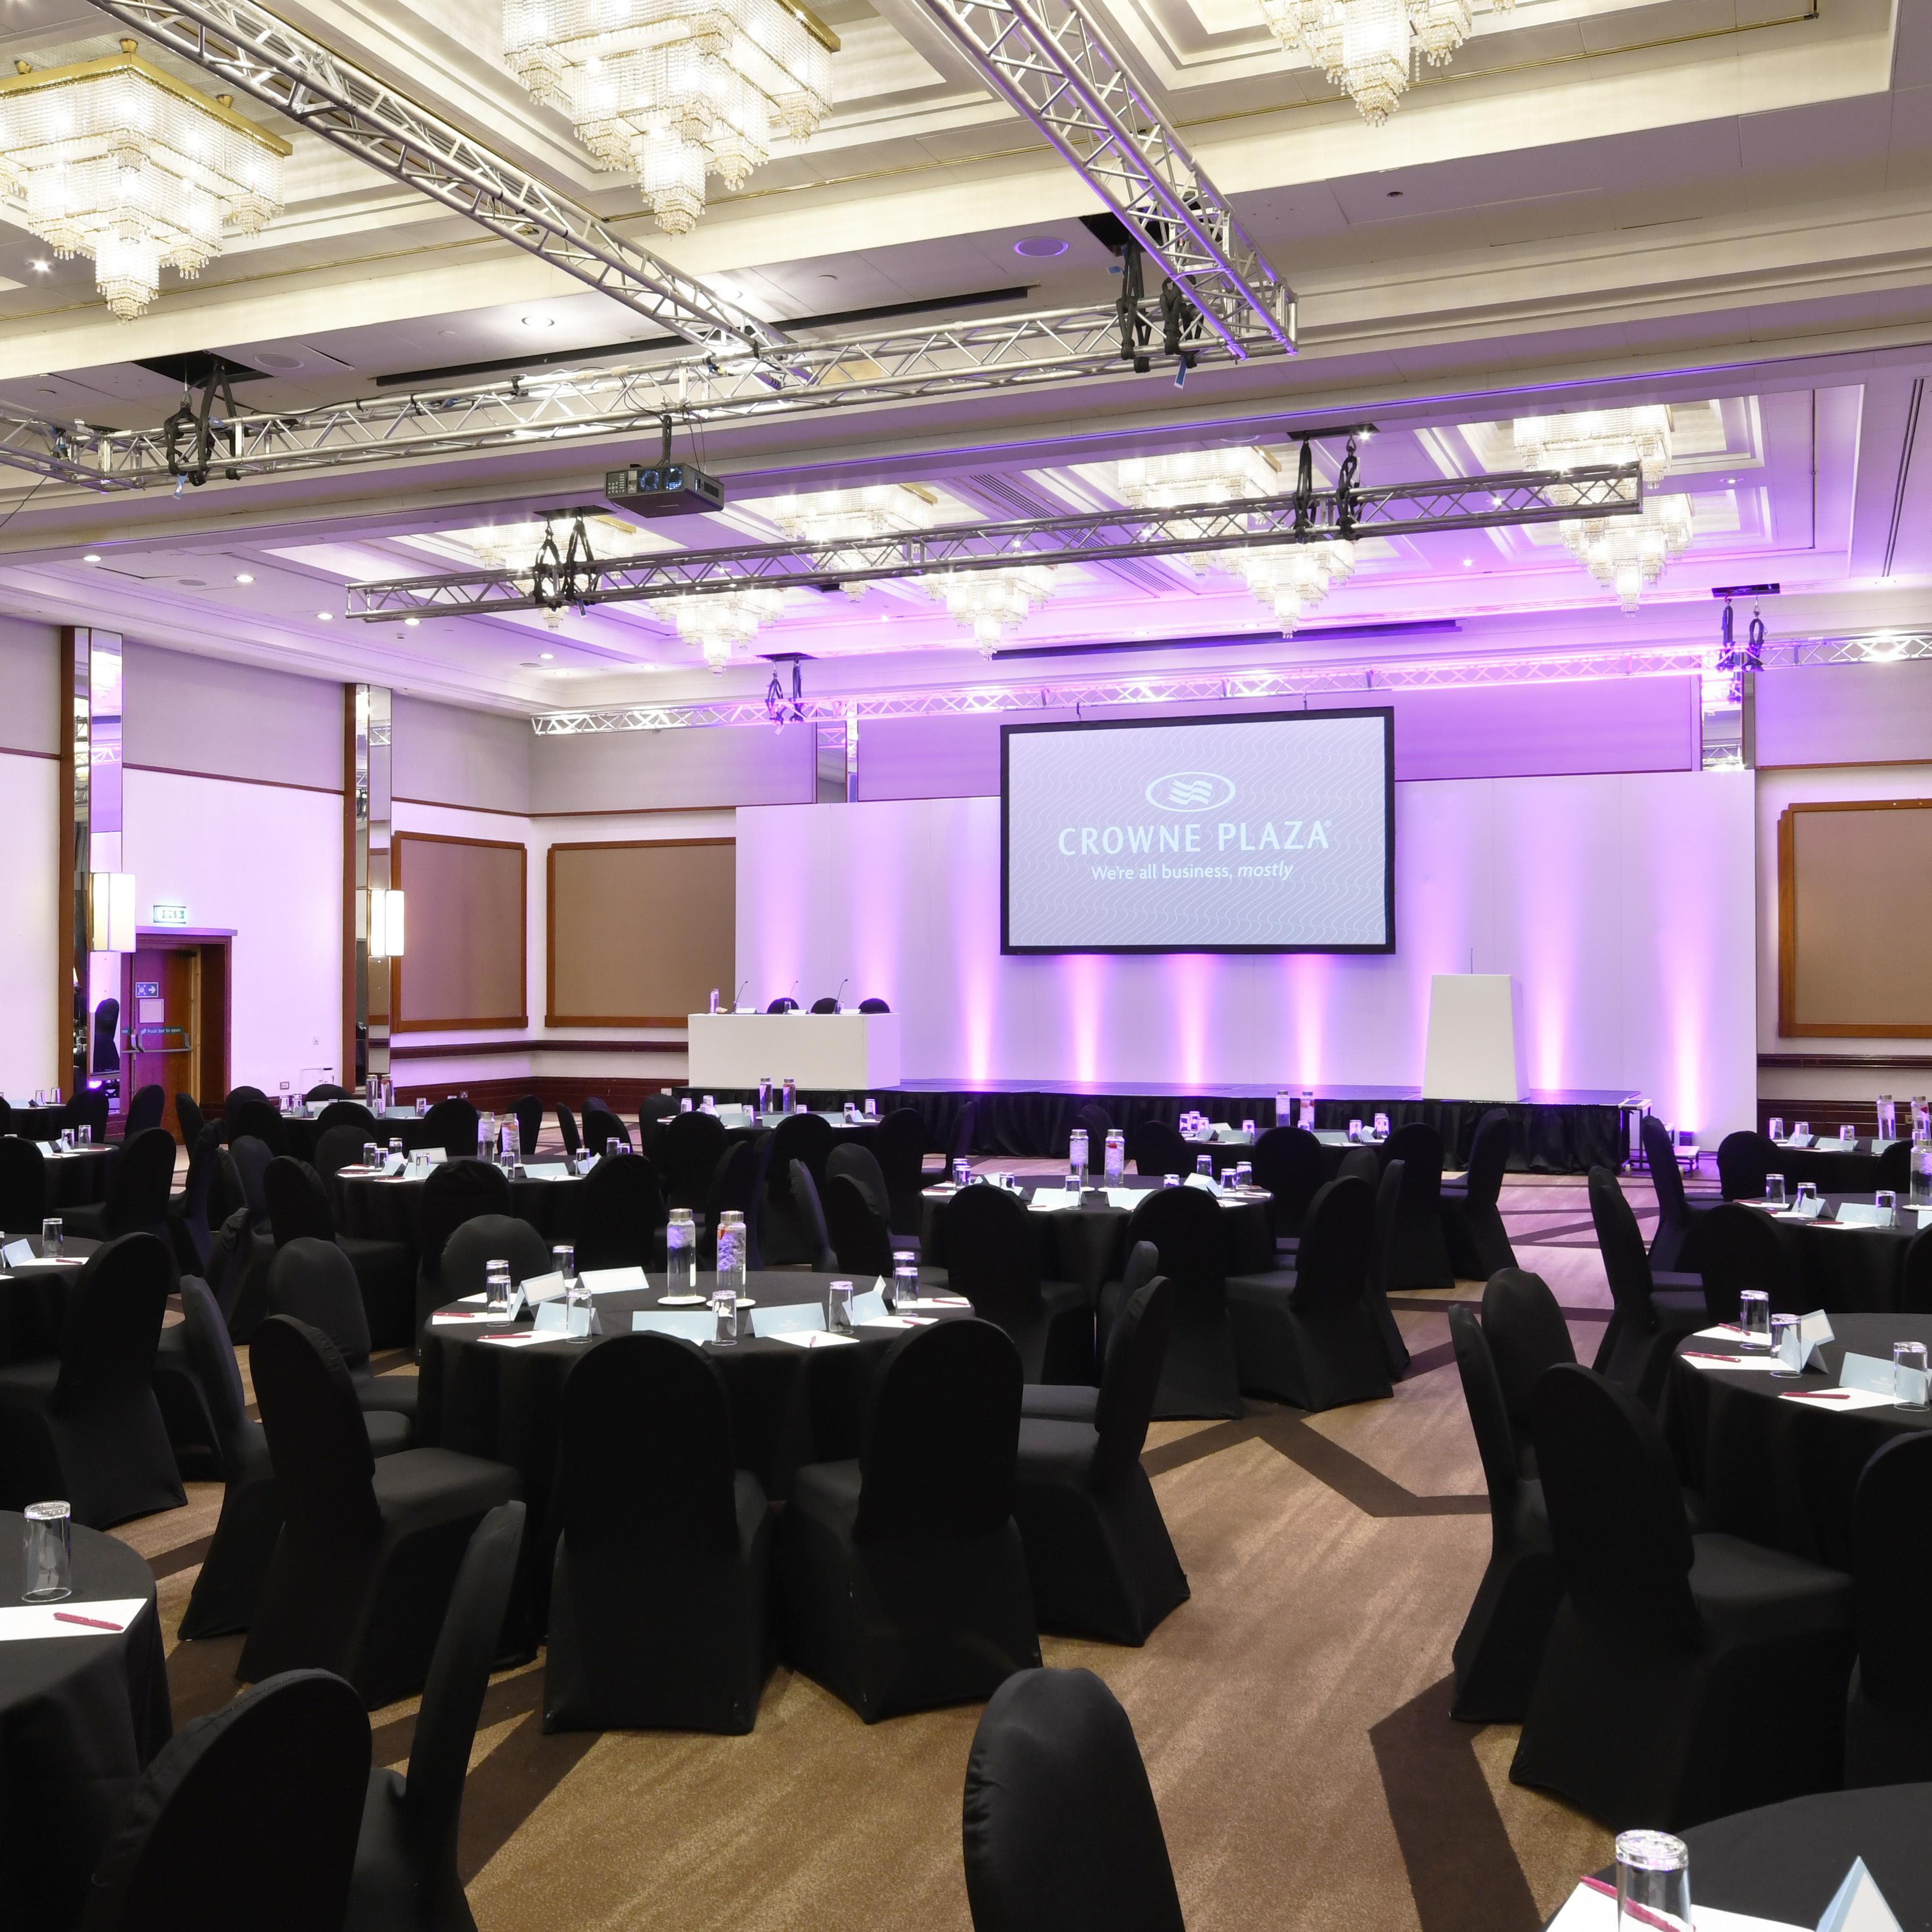 Argyll ballroom perfect for large conferences of up to 500